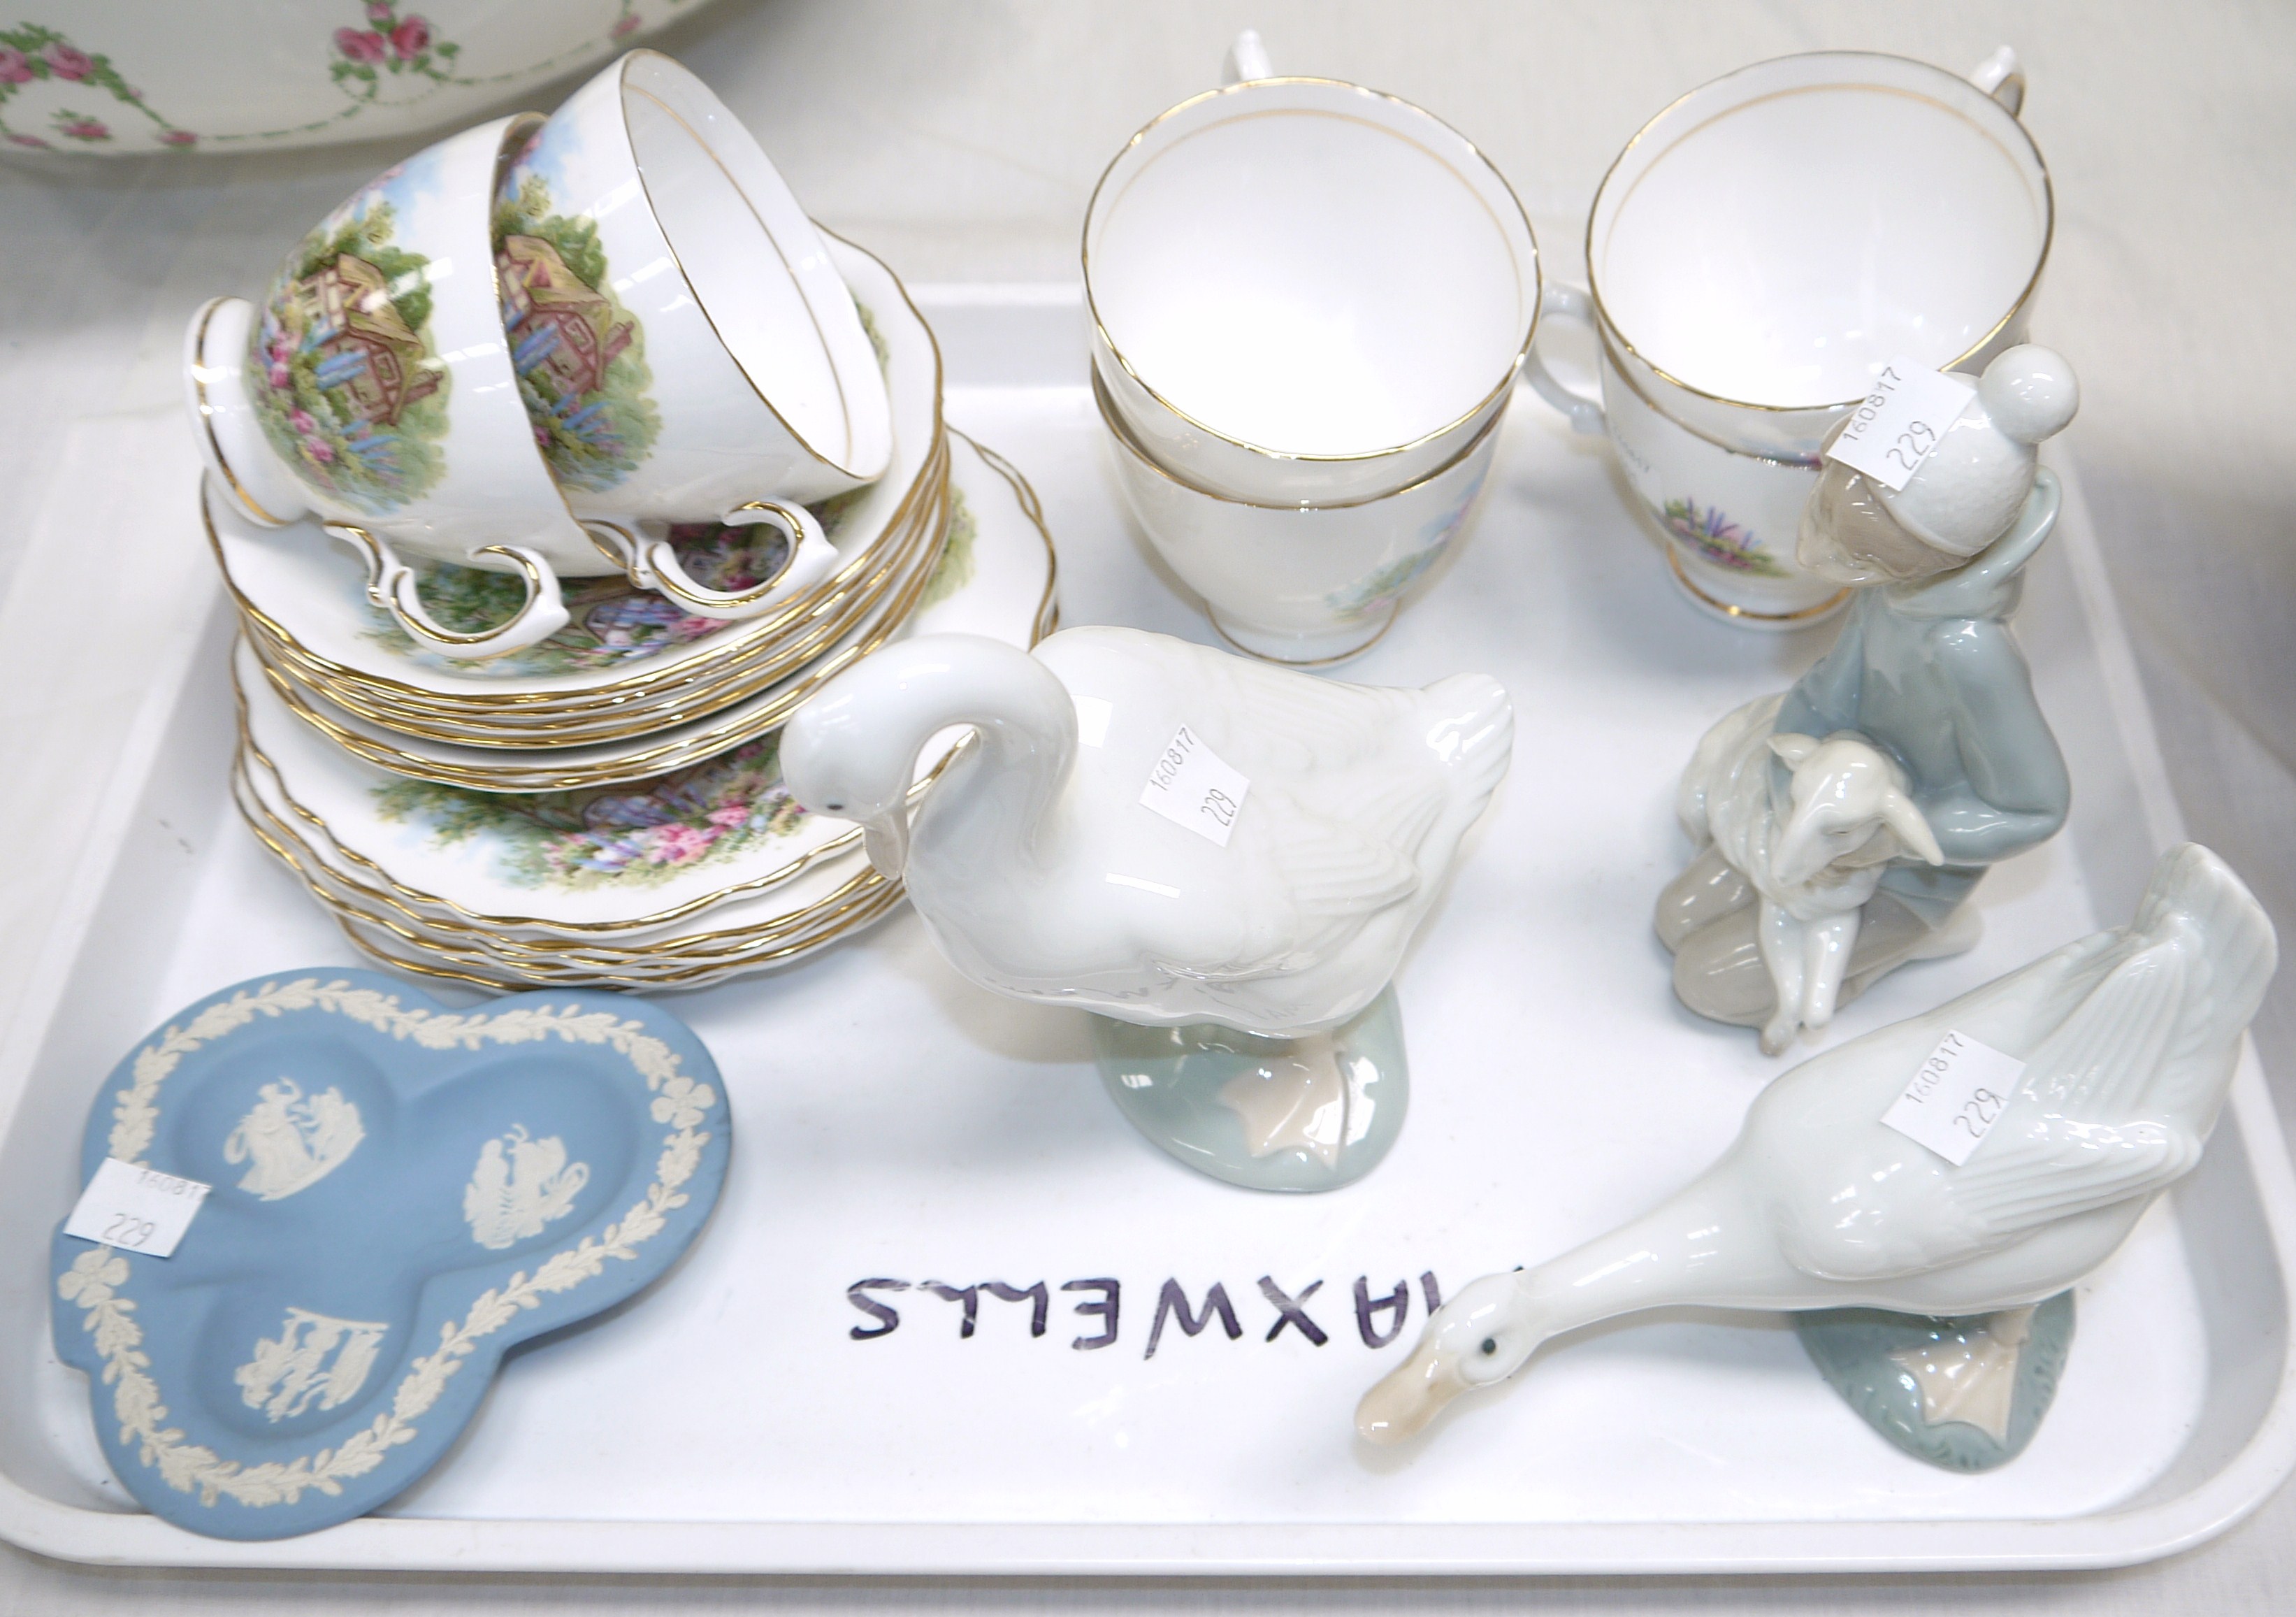 A Vale Royal 18 piece tea set with country cottages; a Lladro boy with lamb; 2 Nao geese; a Wedgwood